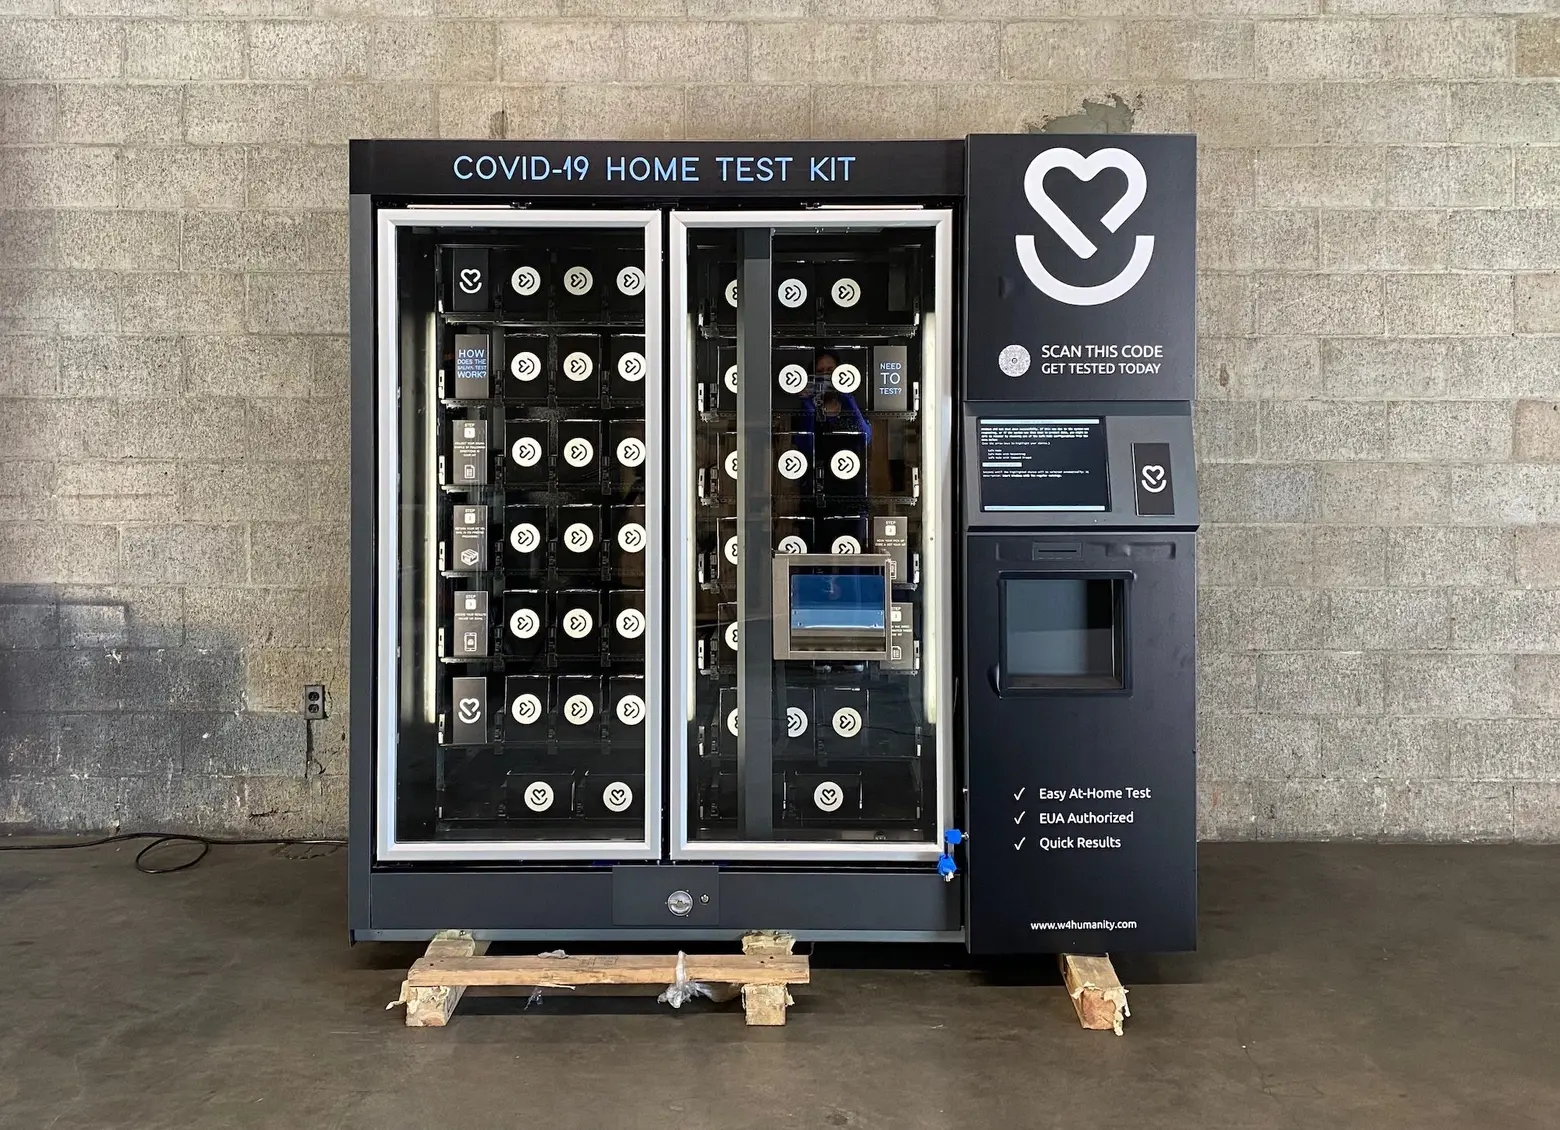 Vending machines selling at-home COVID tests are headed for NYC